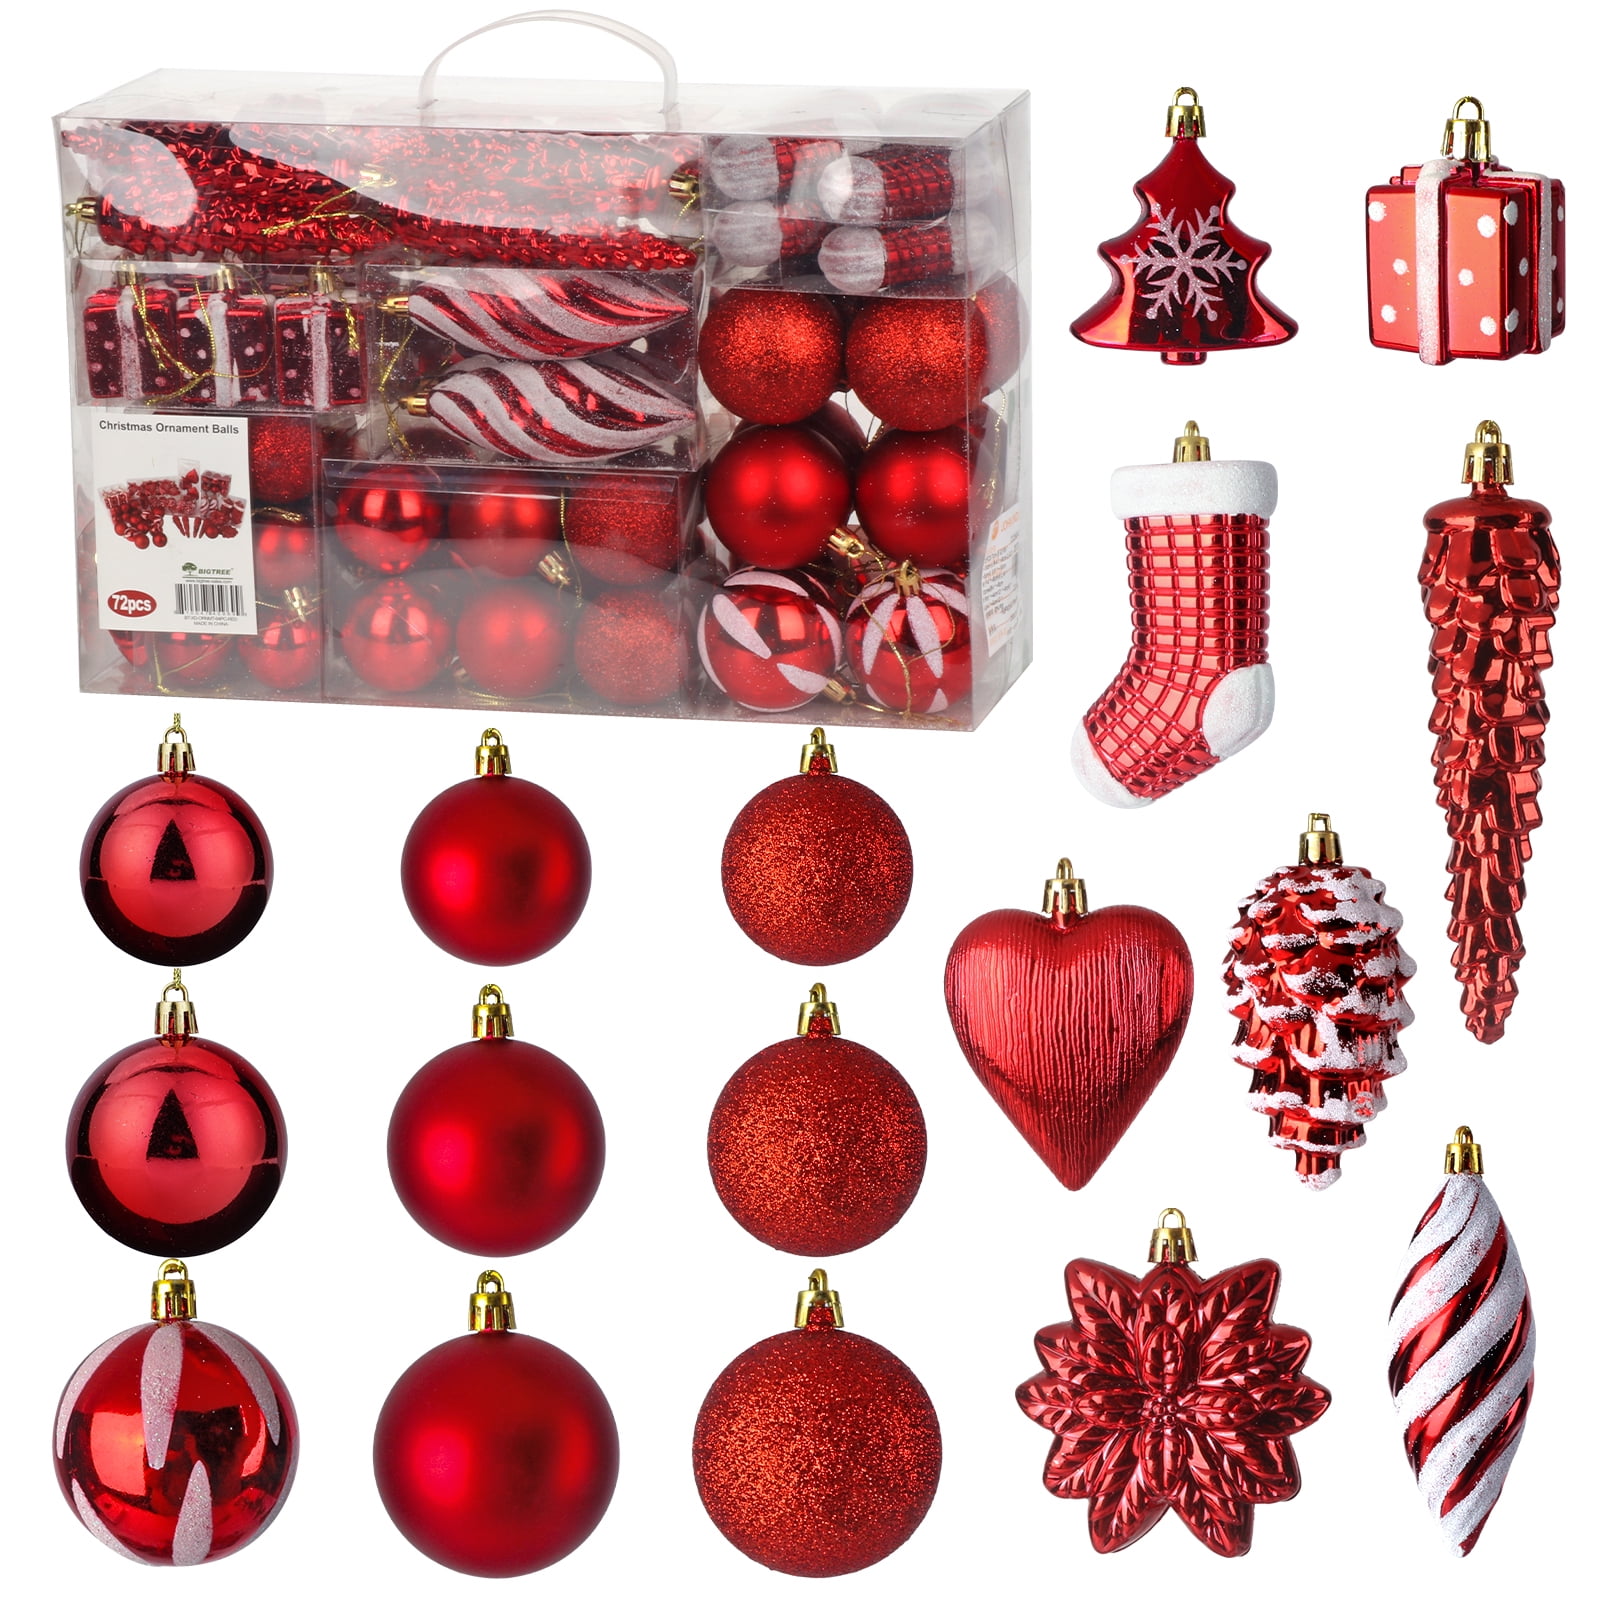  Fillable Plastic Clear Ball Ornament, XXX-Large, 5-1/4-Inch,  6-Piece : Home & Kitchen